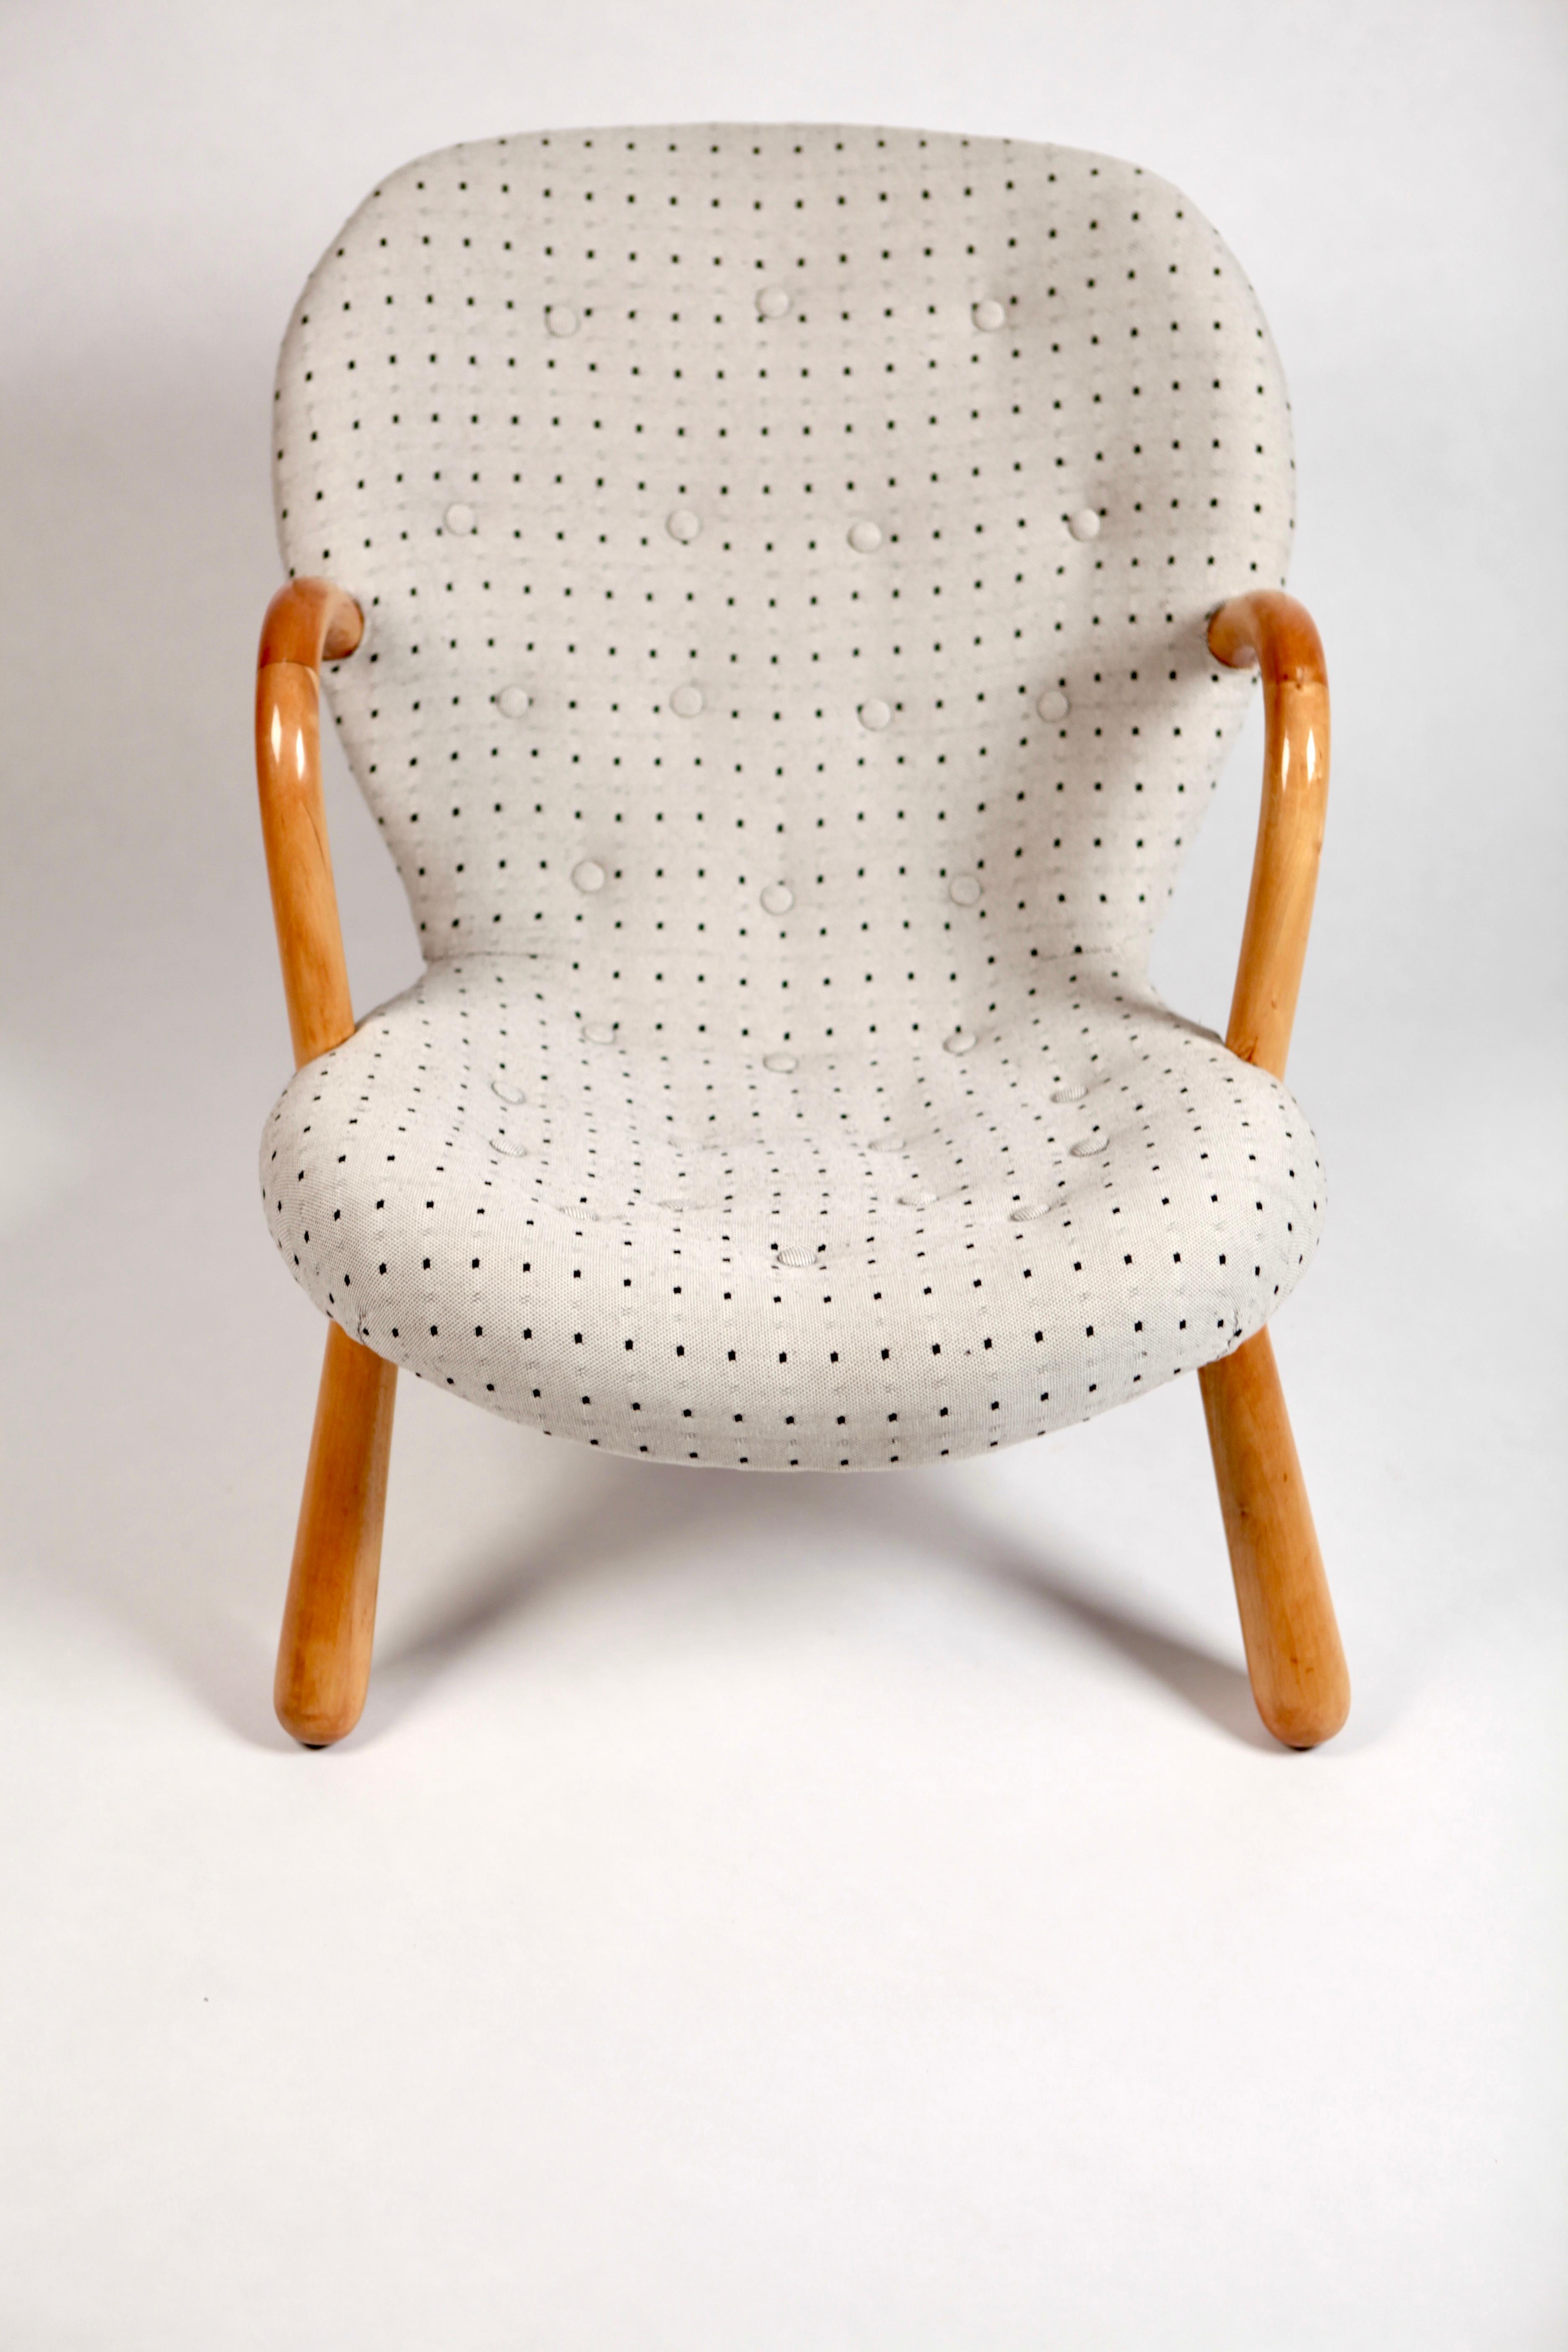 Philip Arctander Clam Chair by Nordisk Stål  Denmark, 1940s 3